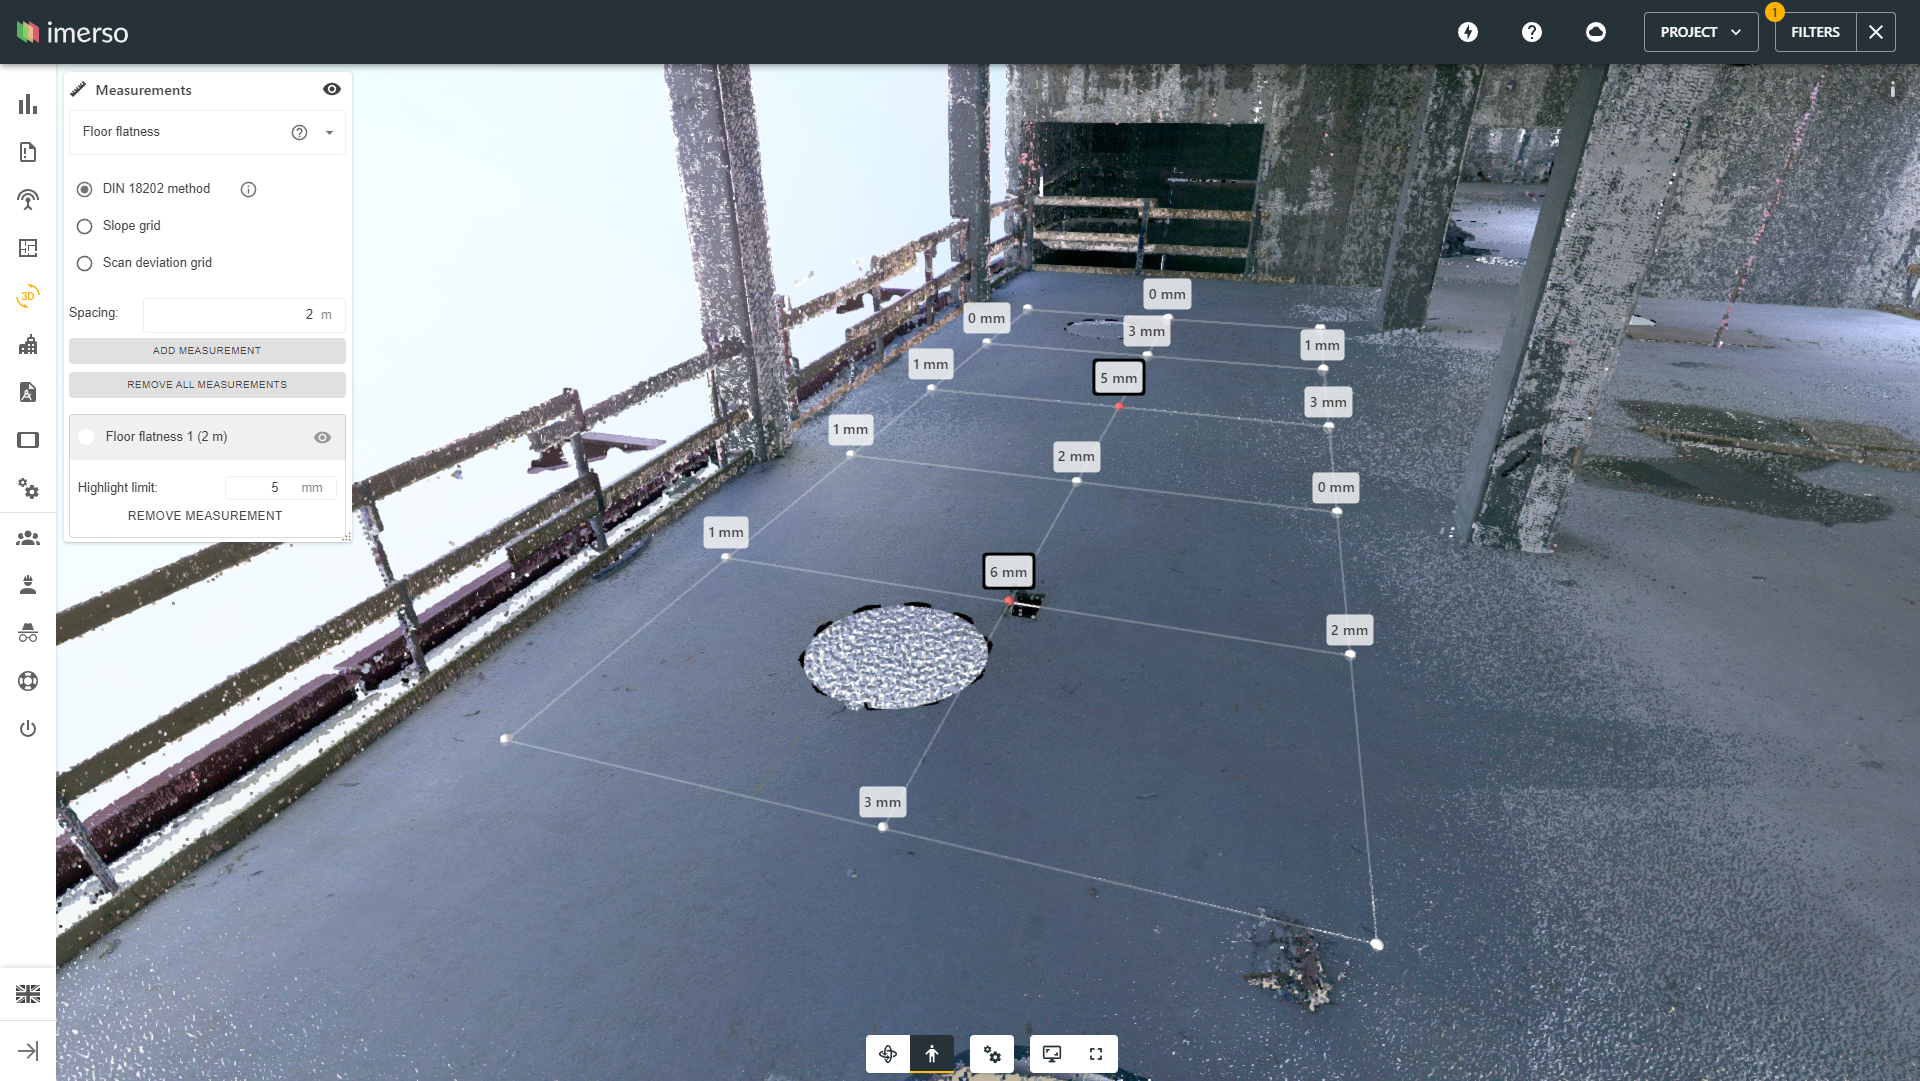 showing din 18202 method for floor construction with Imerso.